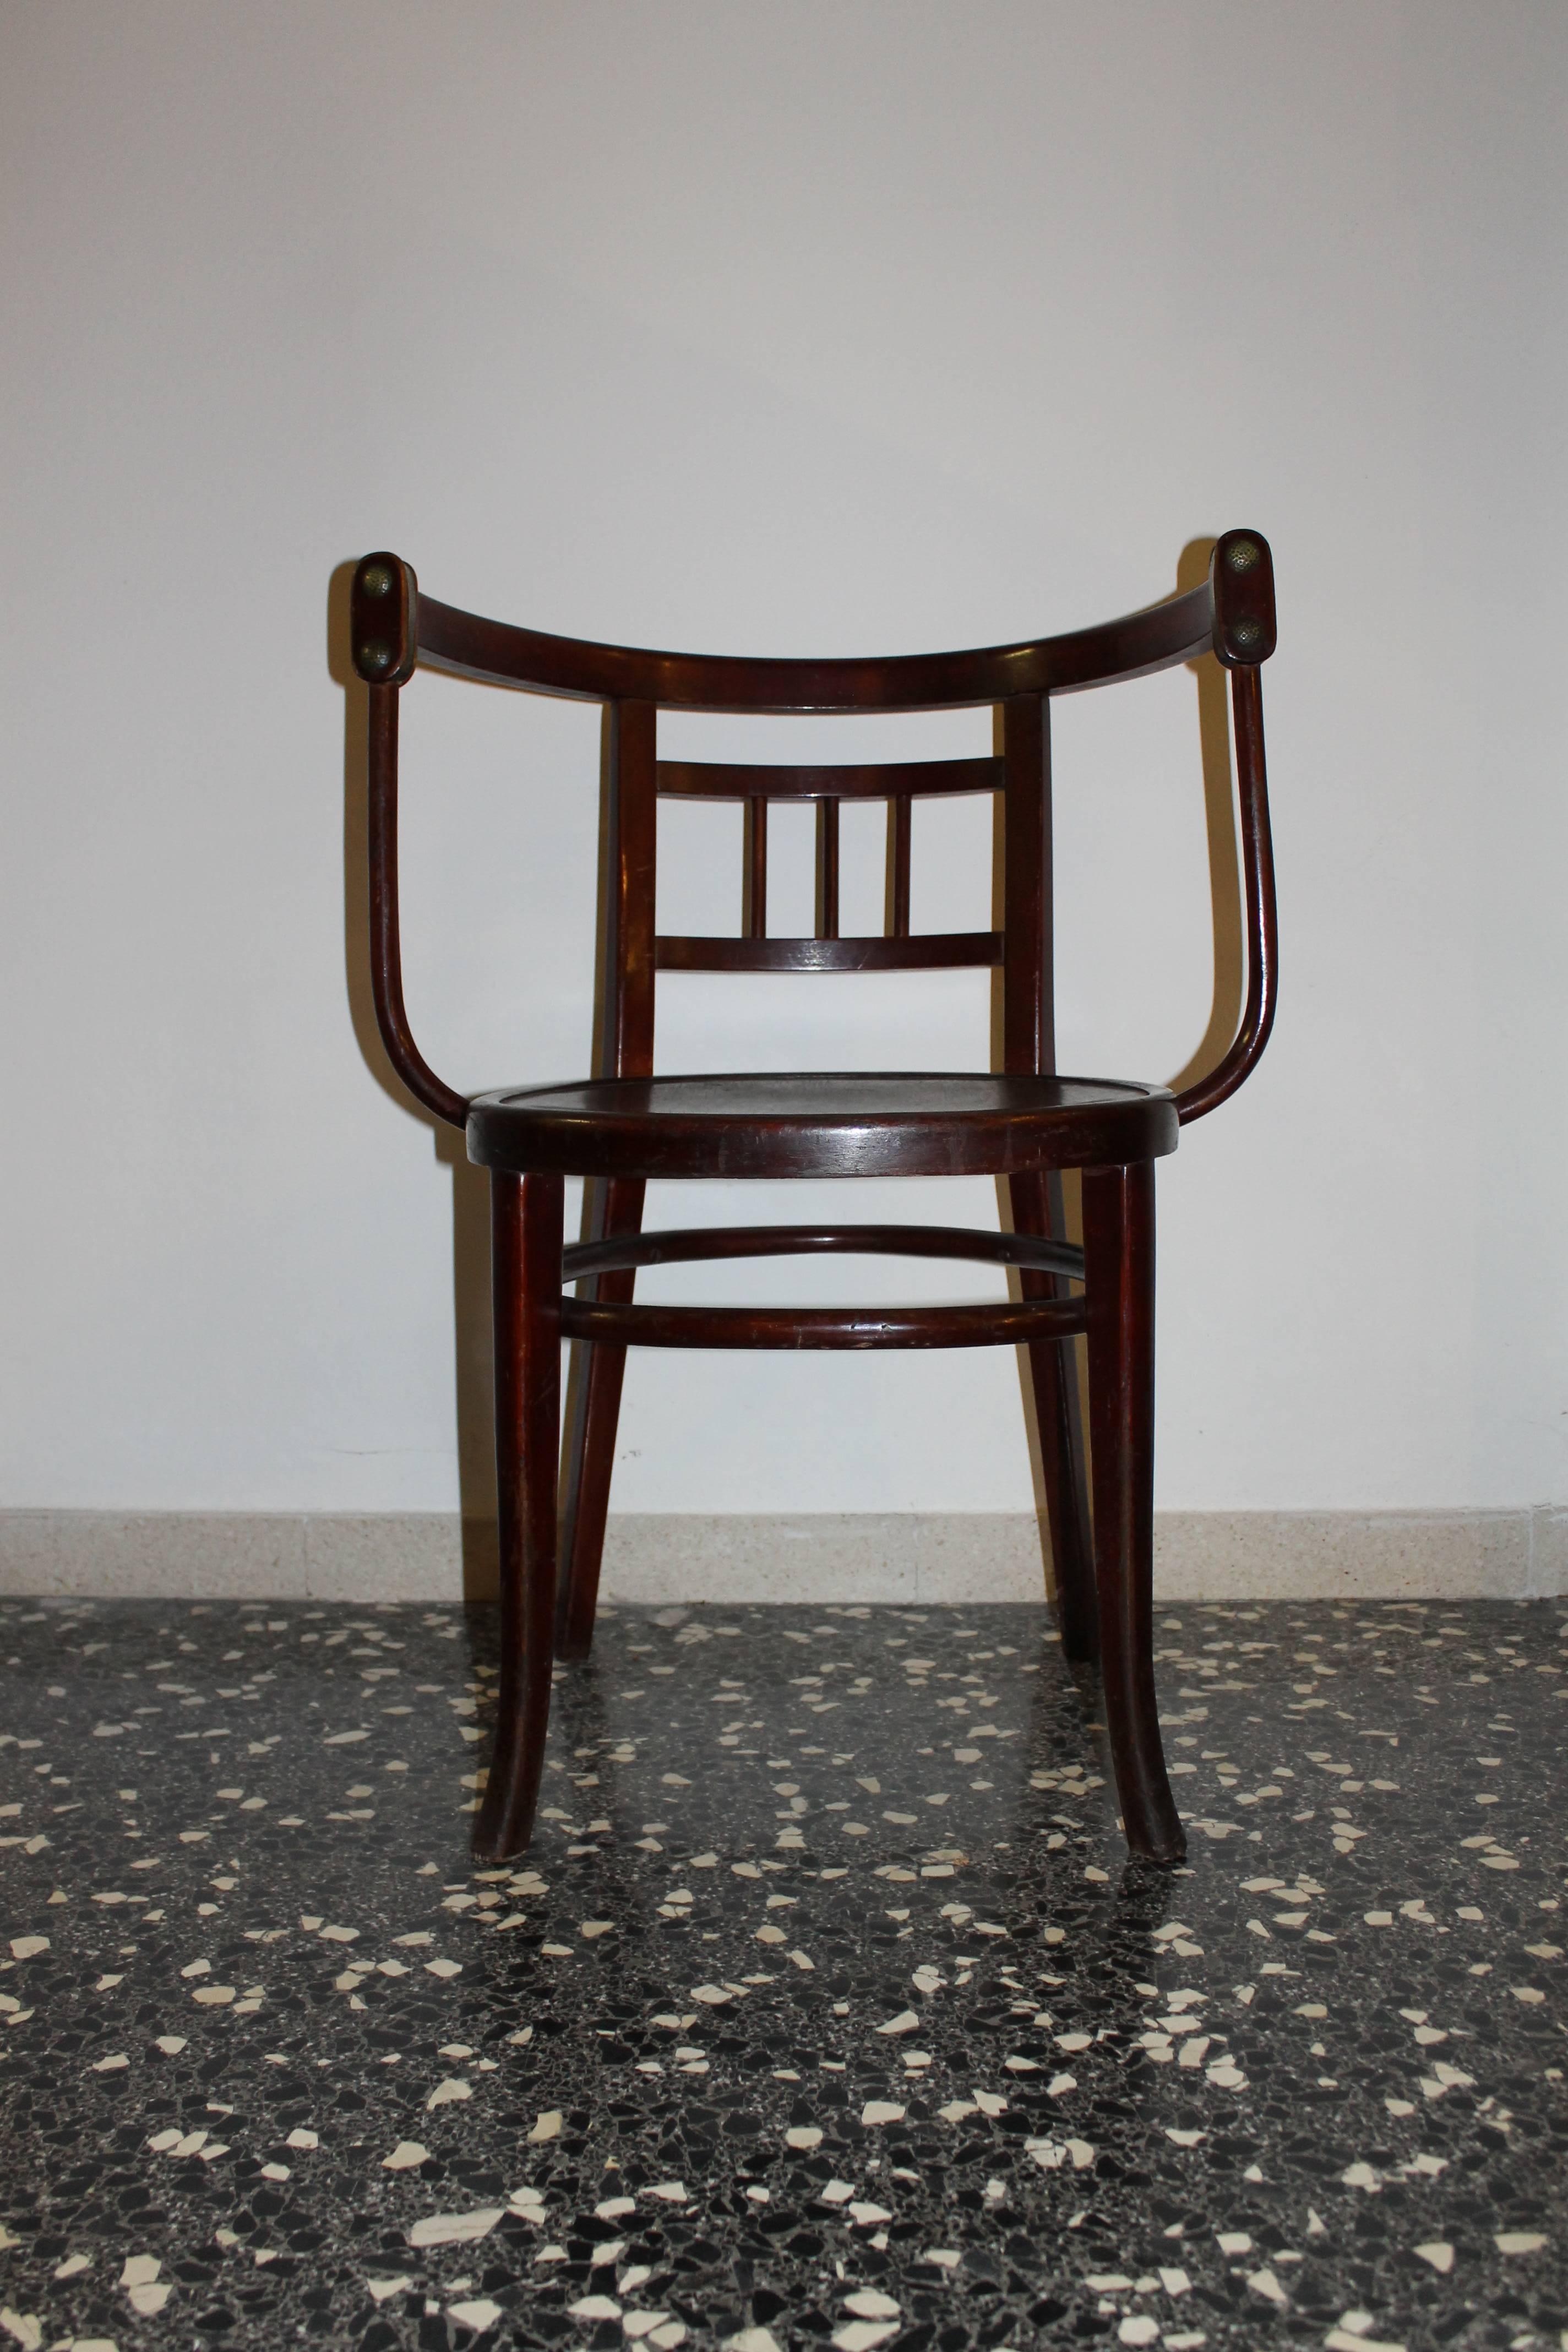 Beechwood armchair with brass buttons and details, designed by Antonio Volpe Udine, dated circa 1905.